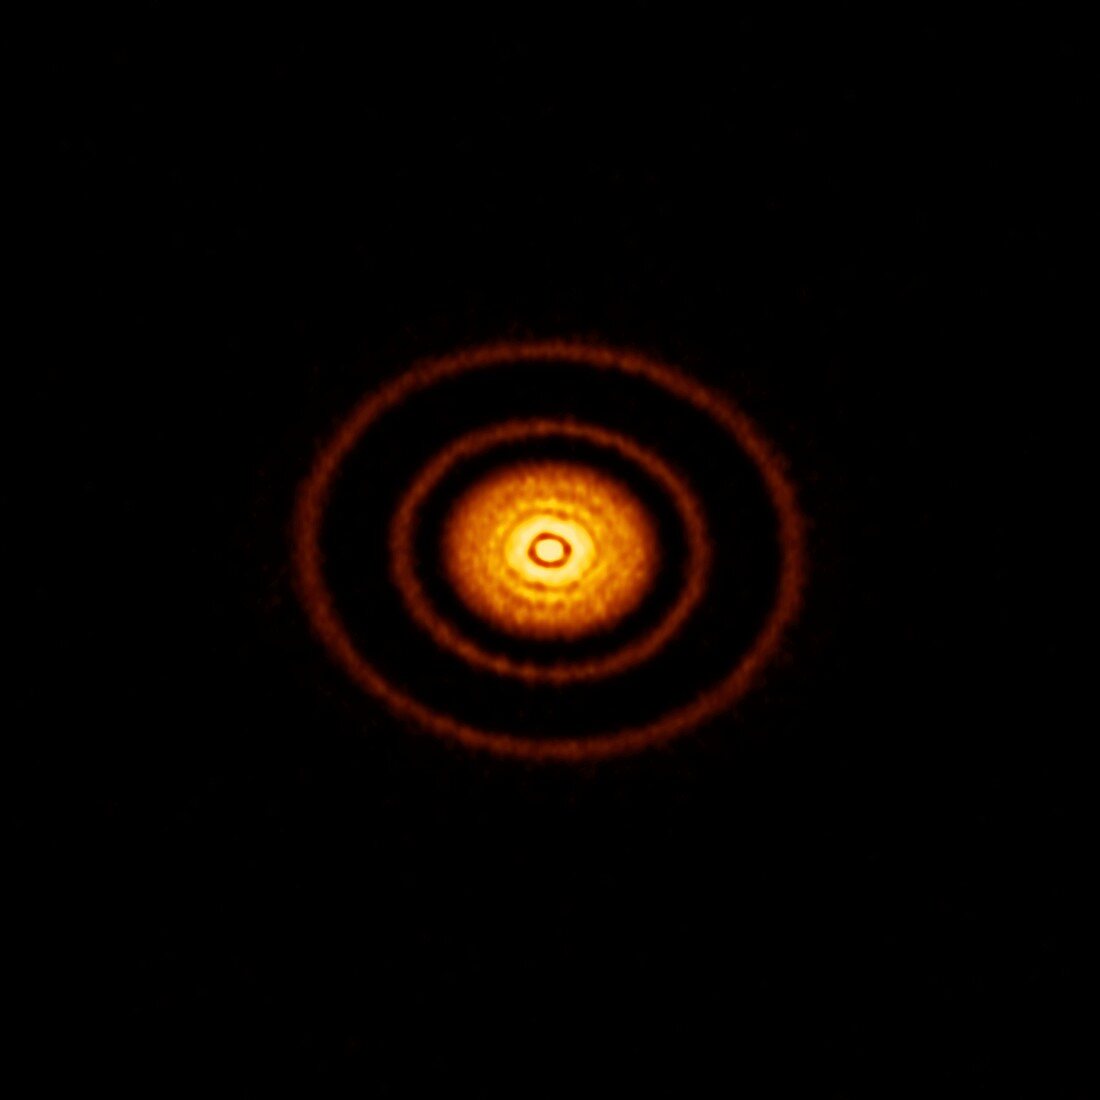 Protoplanetary disc imaged by ALMA